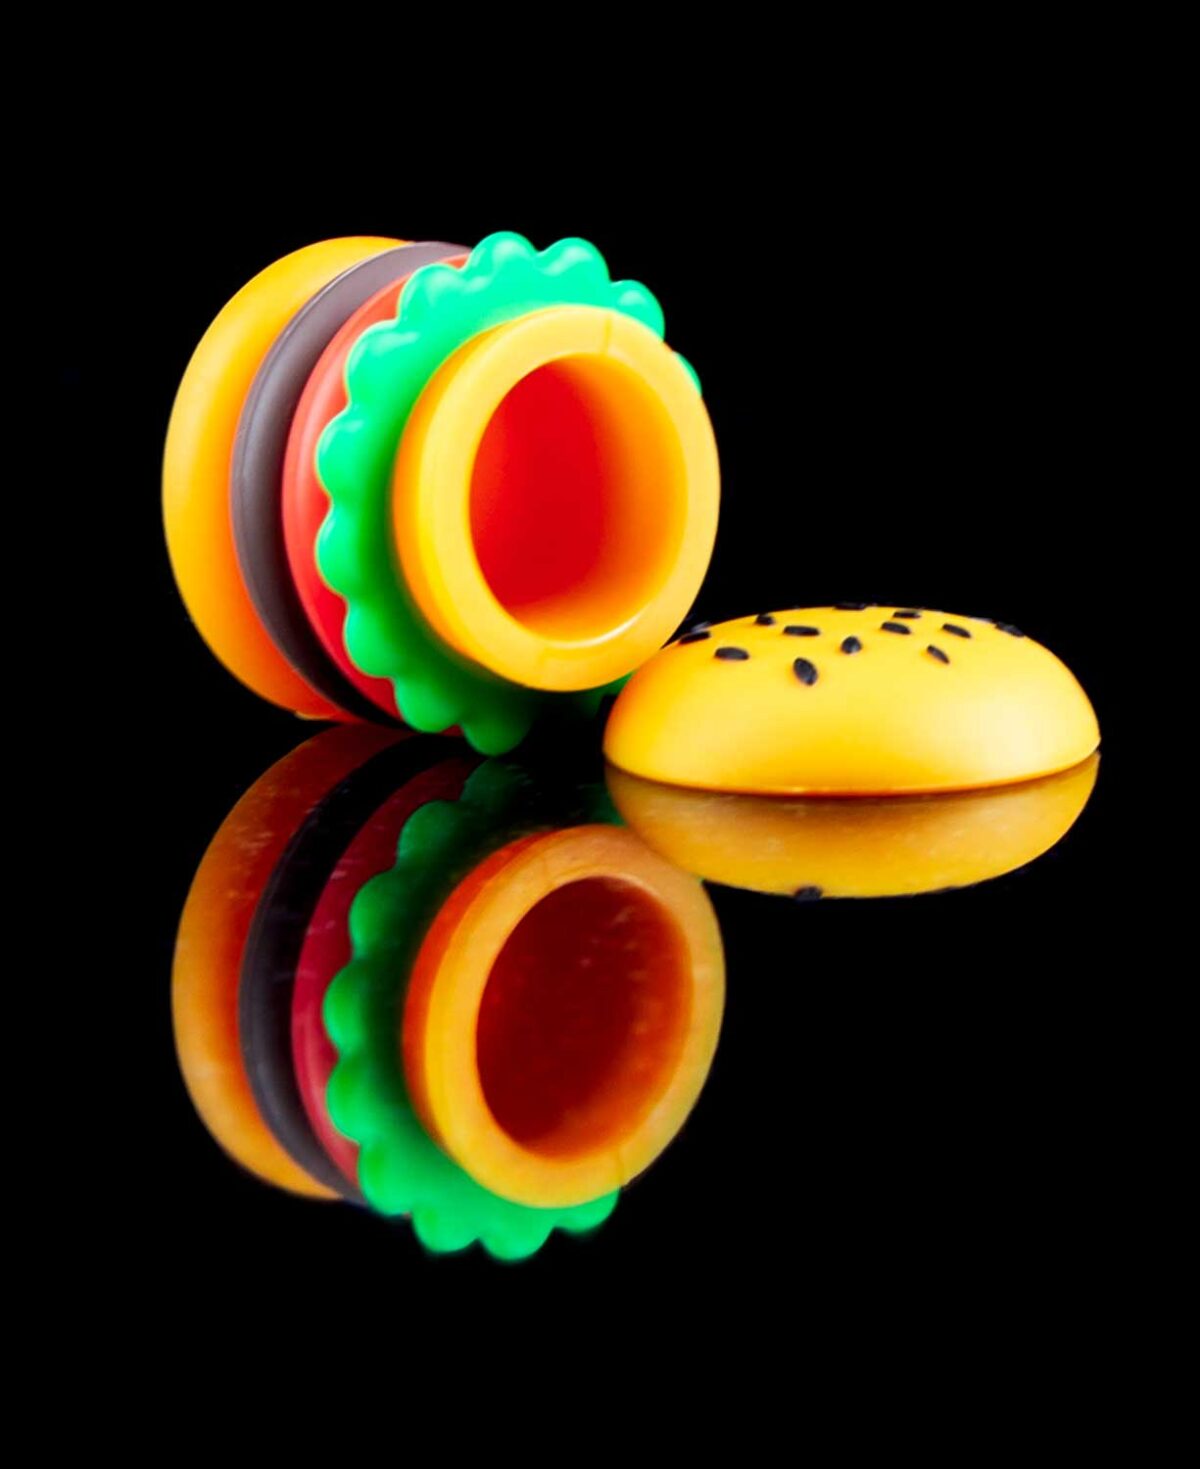 silicone dab container hamburger with sesame seed bun lettuce and patty